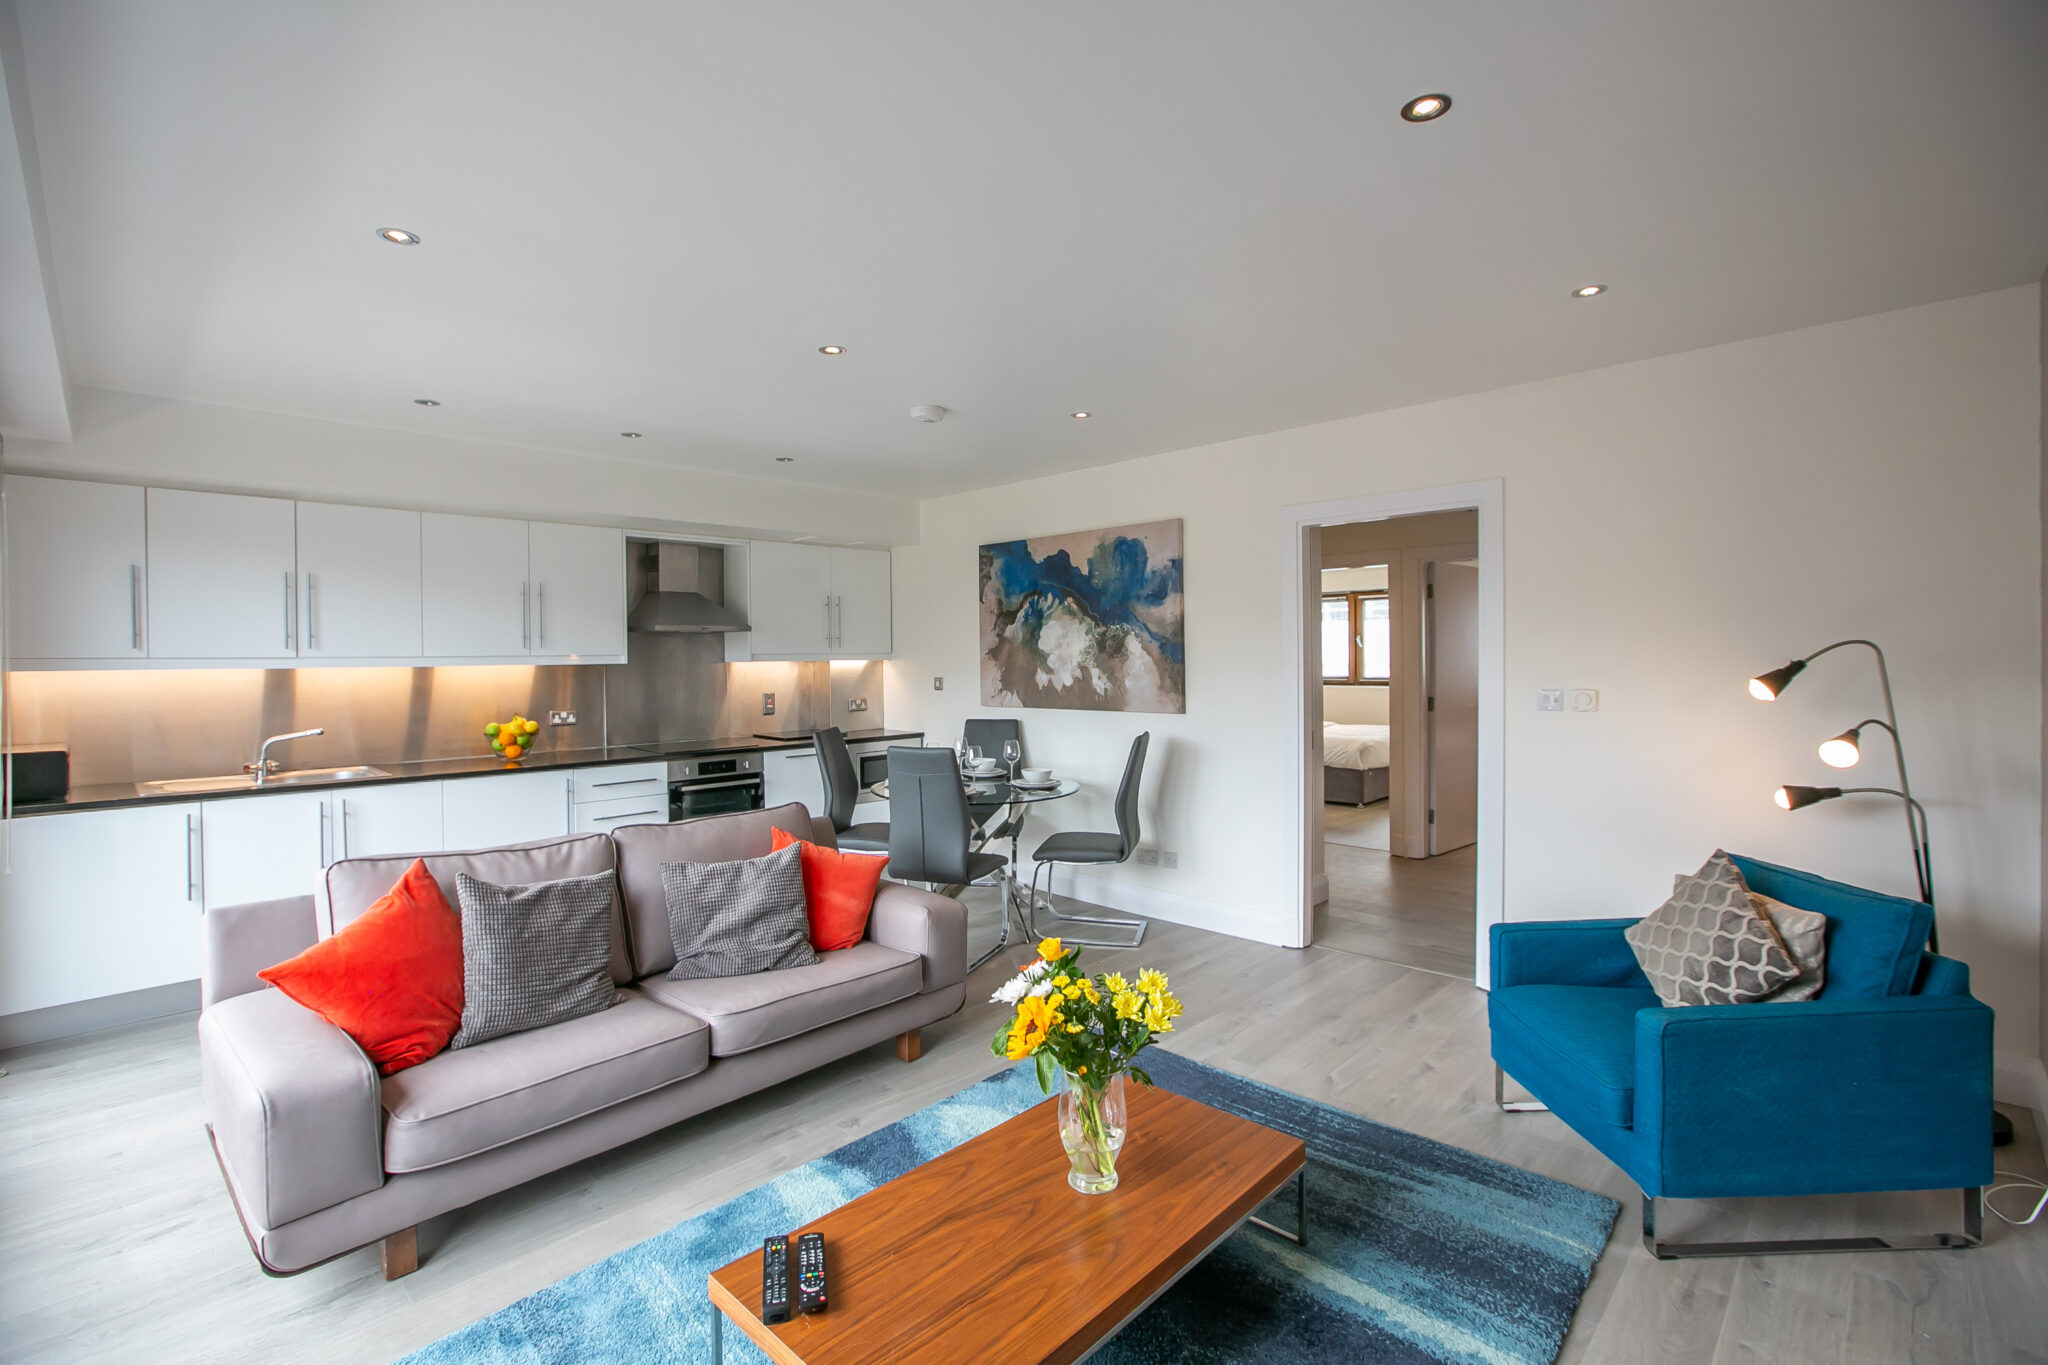 Book Serviced Apartments near IFSC Dublin today! We Offer Executive Serviced Apartments close to Dublin's premier business districts! Urban Stay